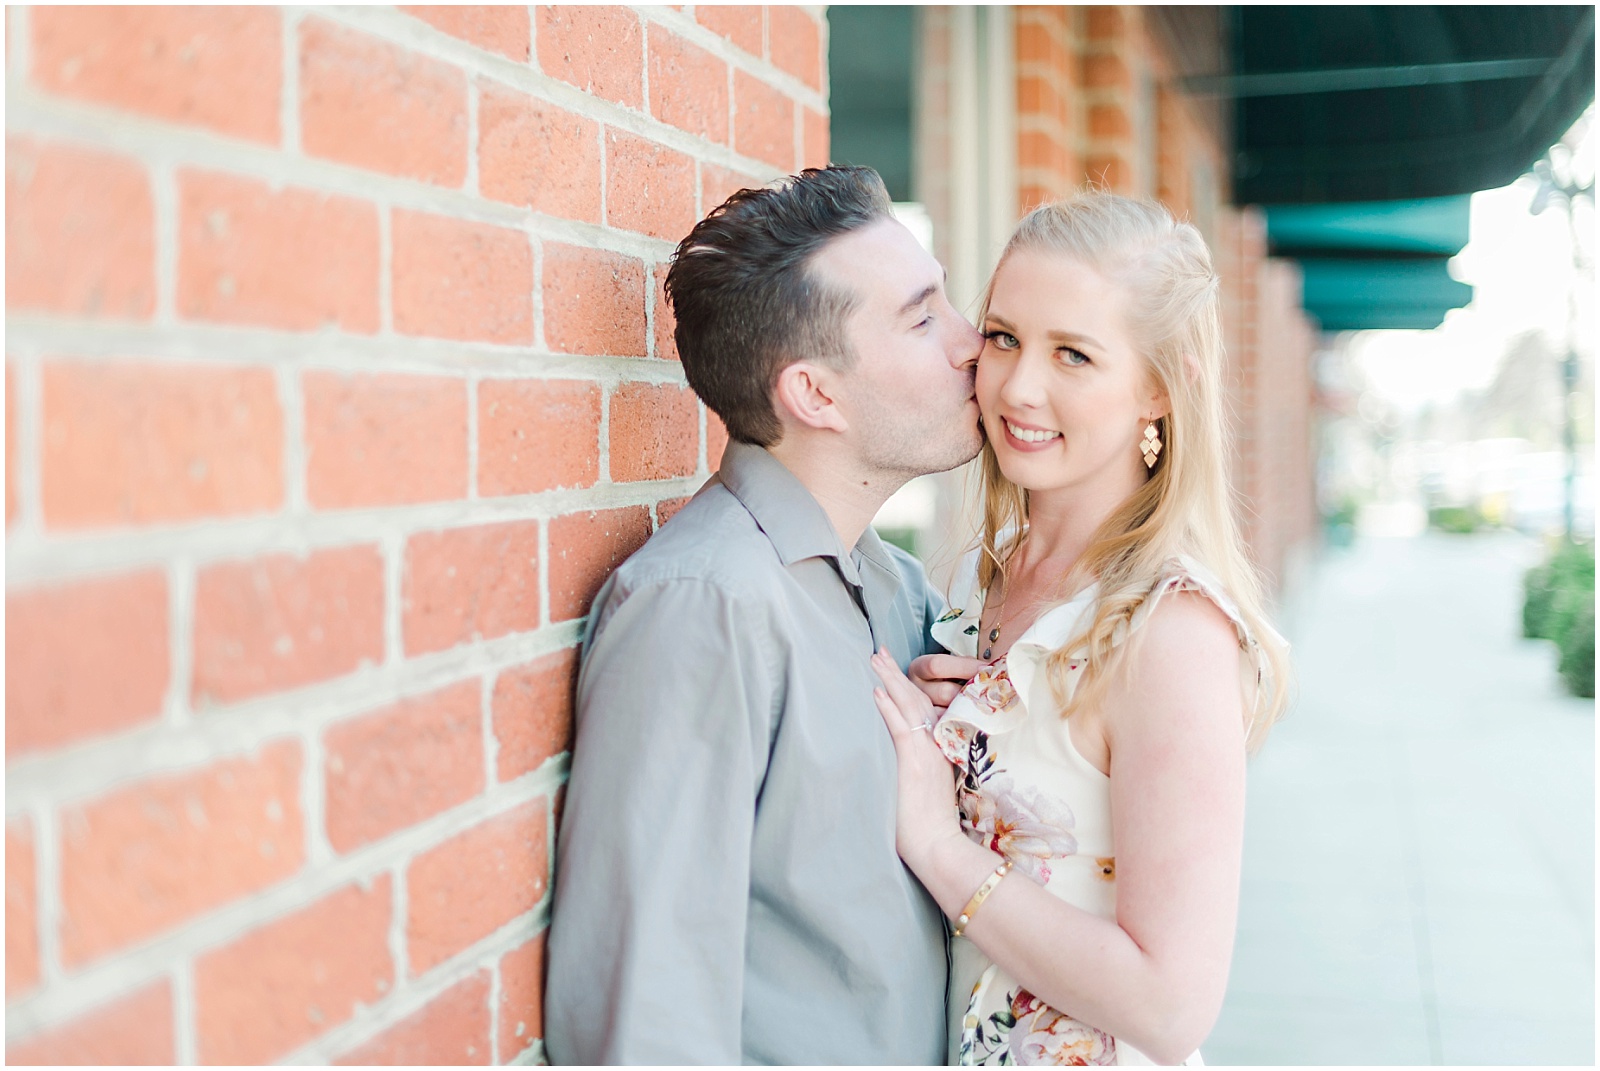 Monrovia Engagement Session by Mollie Jane Photography. To see more go to www.molliejanephotography.com